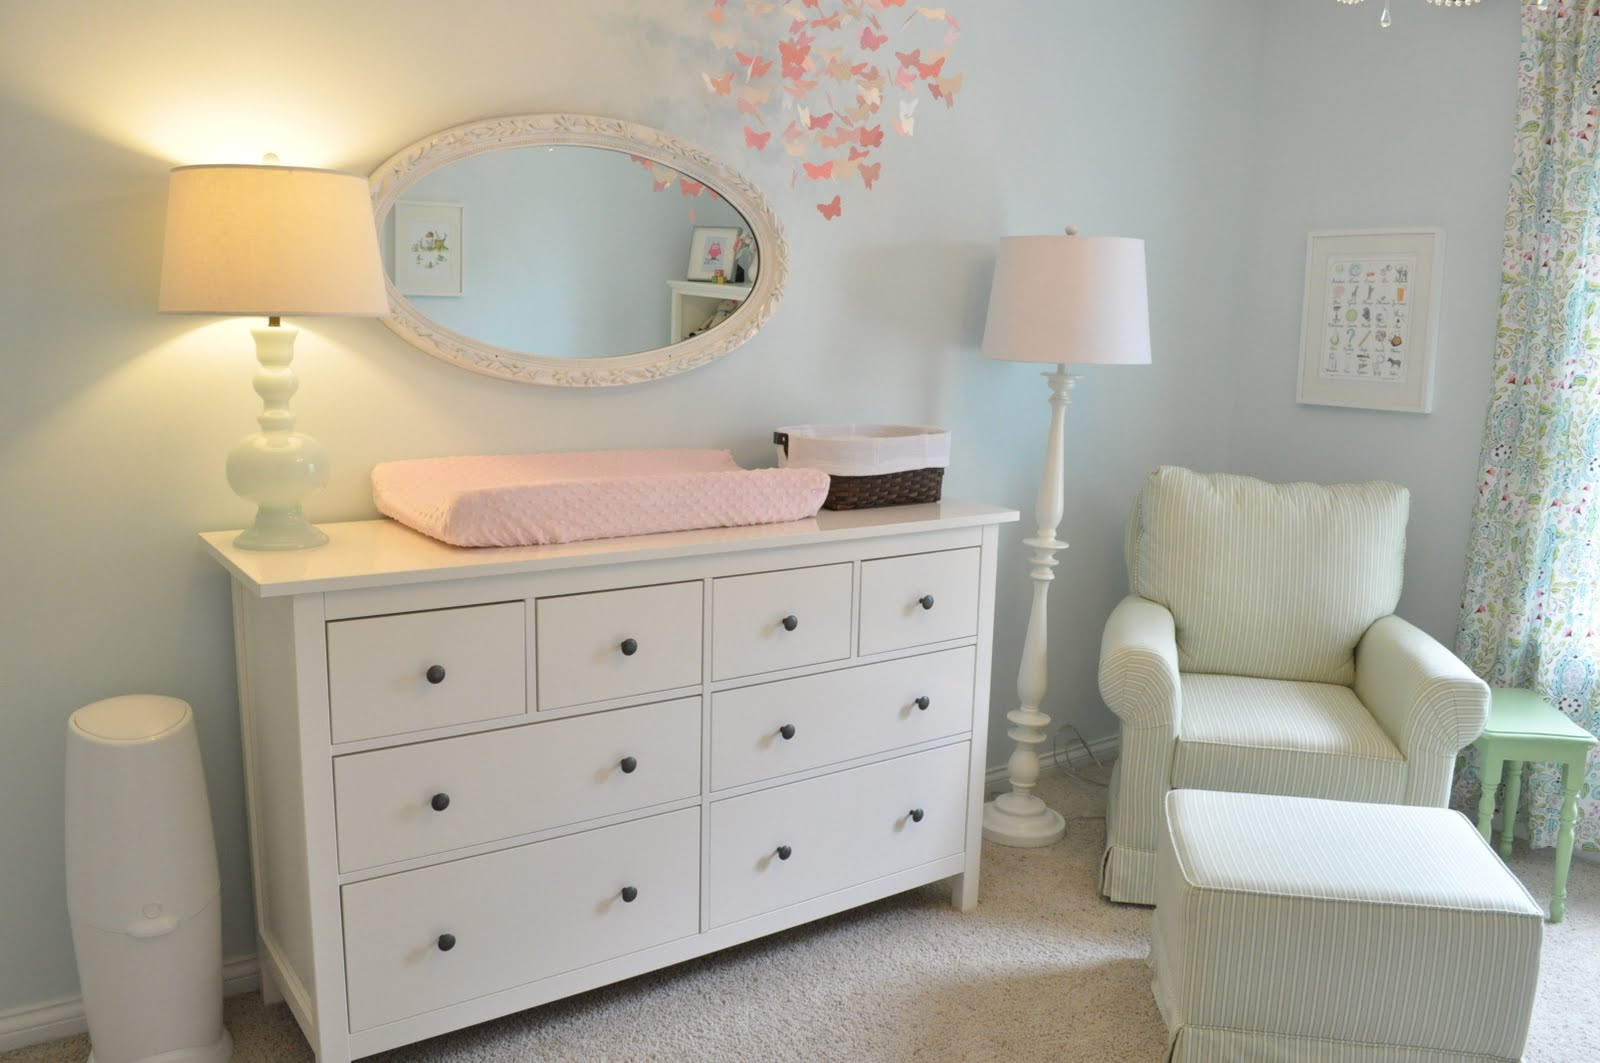 White Dresser For Baby Room
 Anyone have pics of Ikea Hemnes dresser in nursery — The Bump